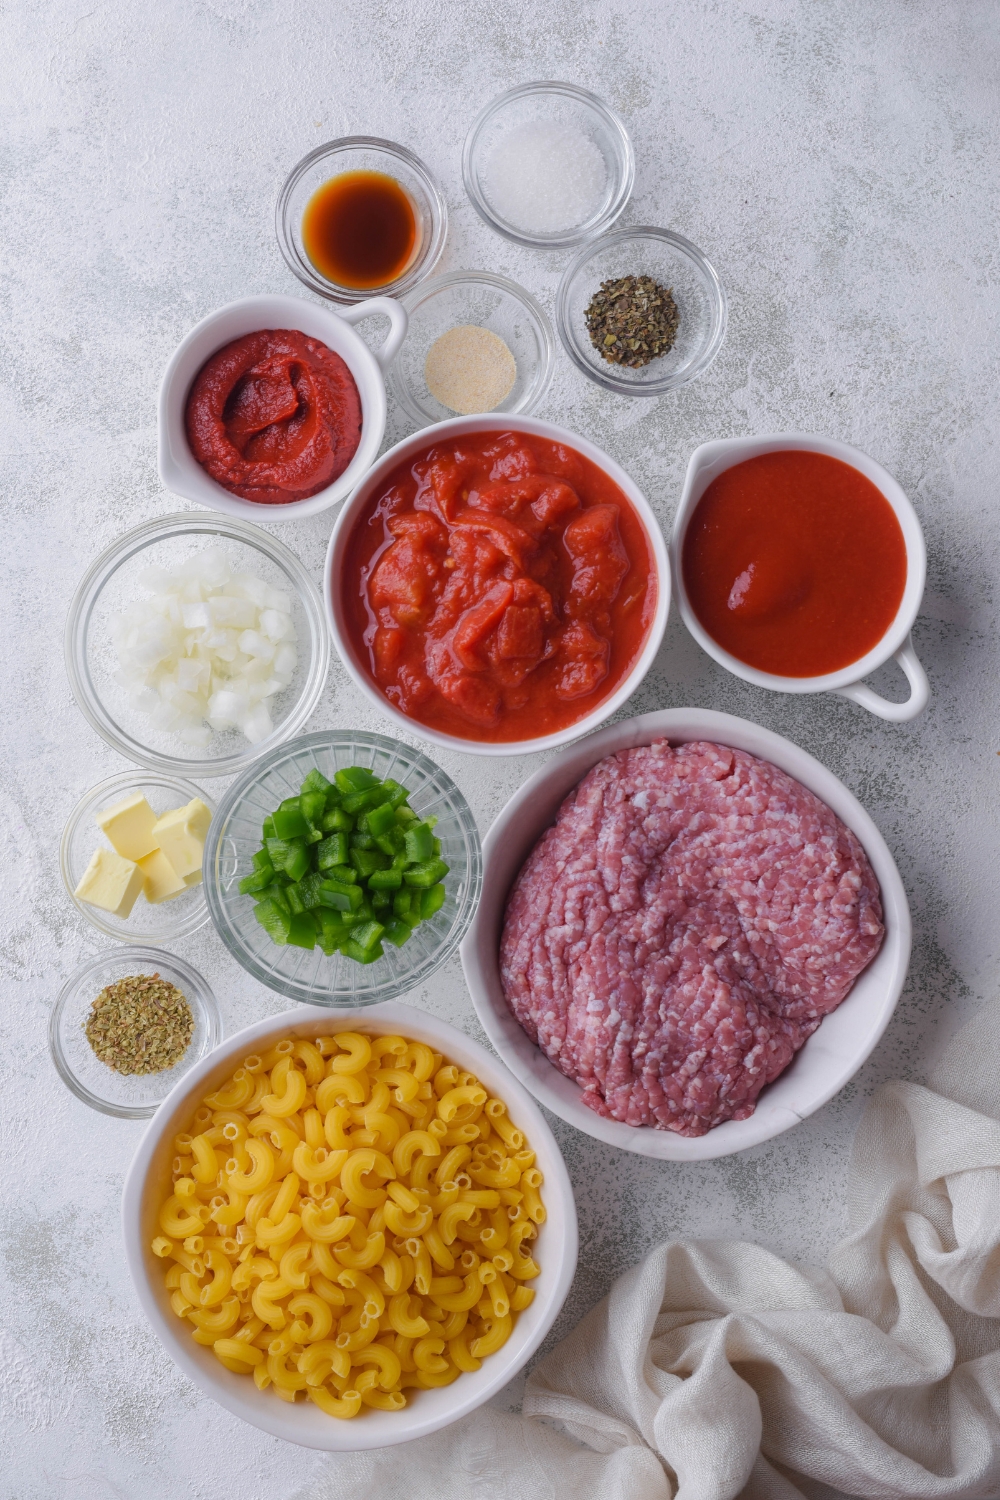 An assortment of ingredients including tomato sauce, tomato paste, raw ground beef, dried elbow macaroni, diced bell peppers, diced onion, spices, and butter.